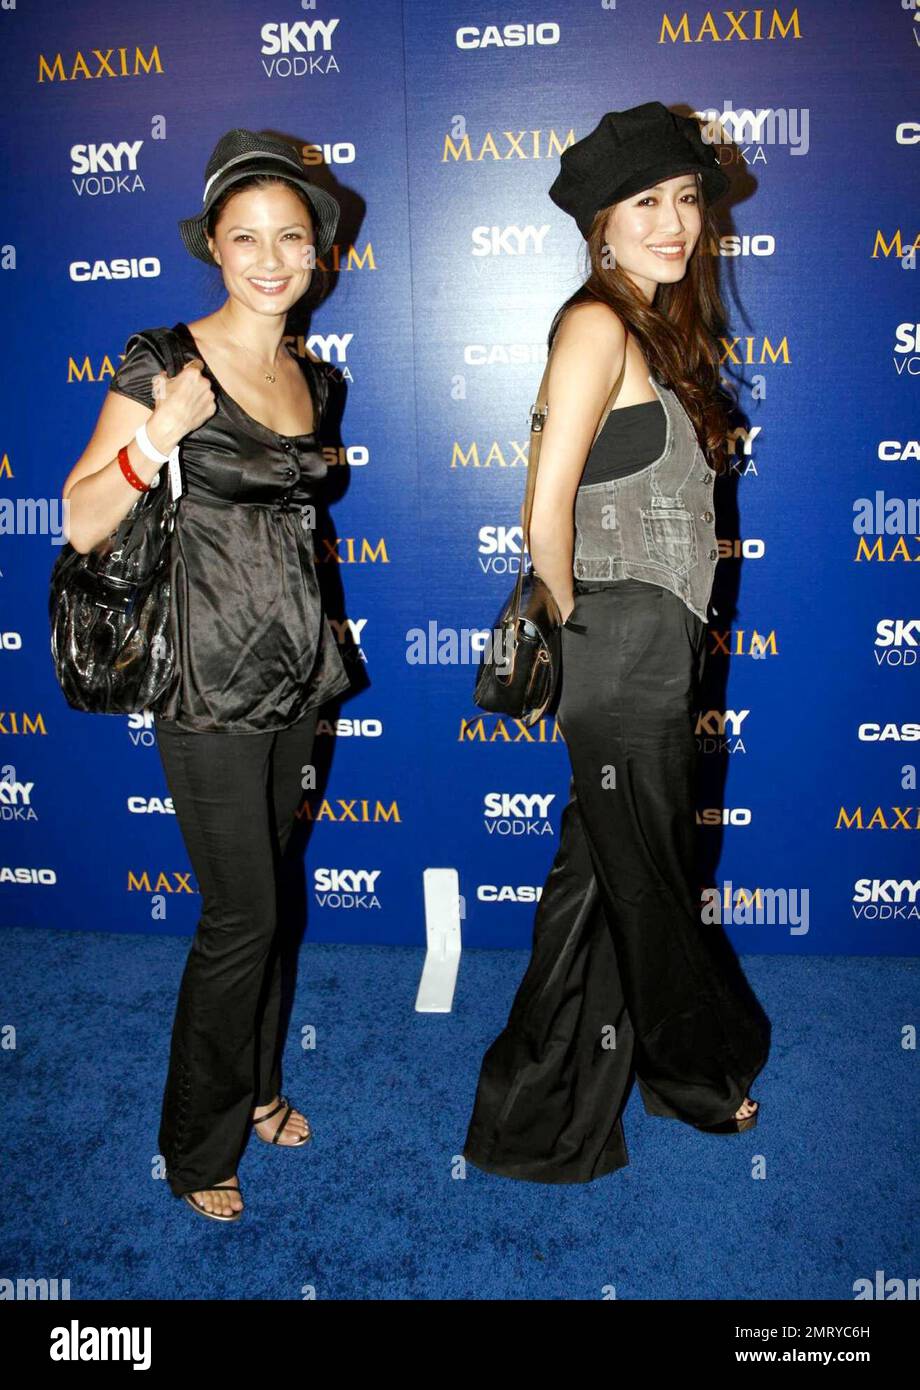 Mara Lane at the Maxim Style Awards presented by Casio at the Avalon in Hollywood. Los Angeles, Caif. 9/18/07. Stock Photo